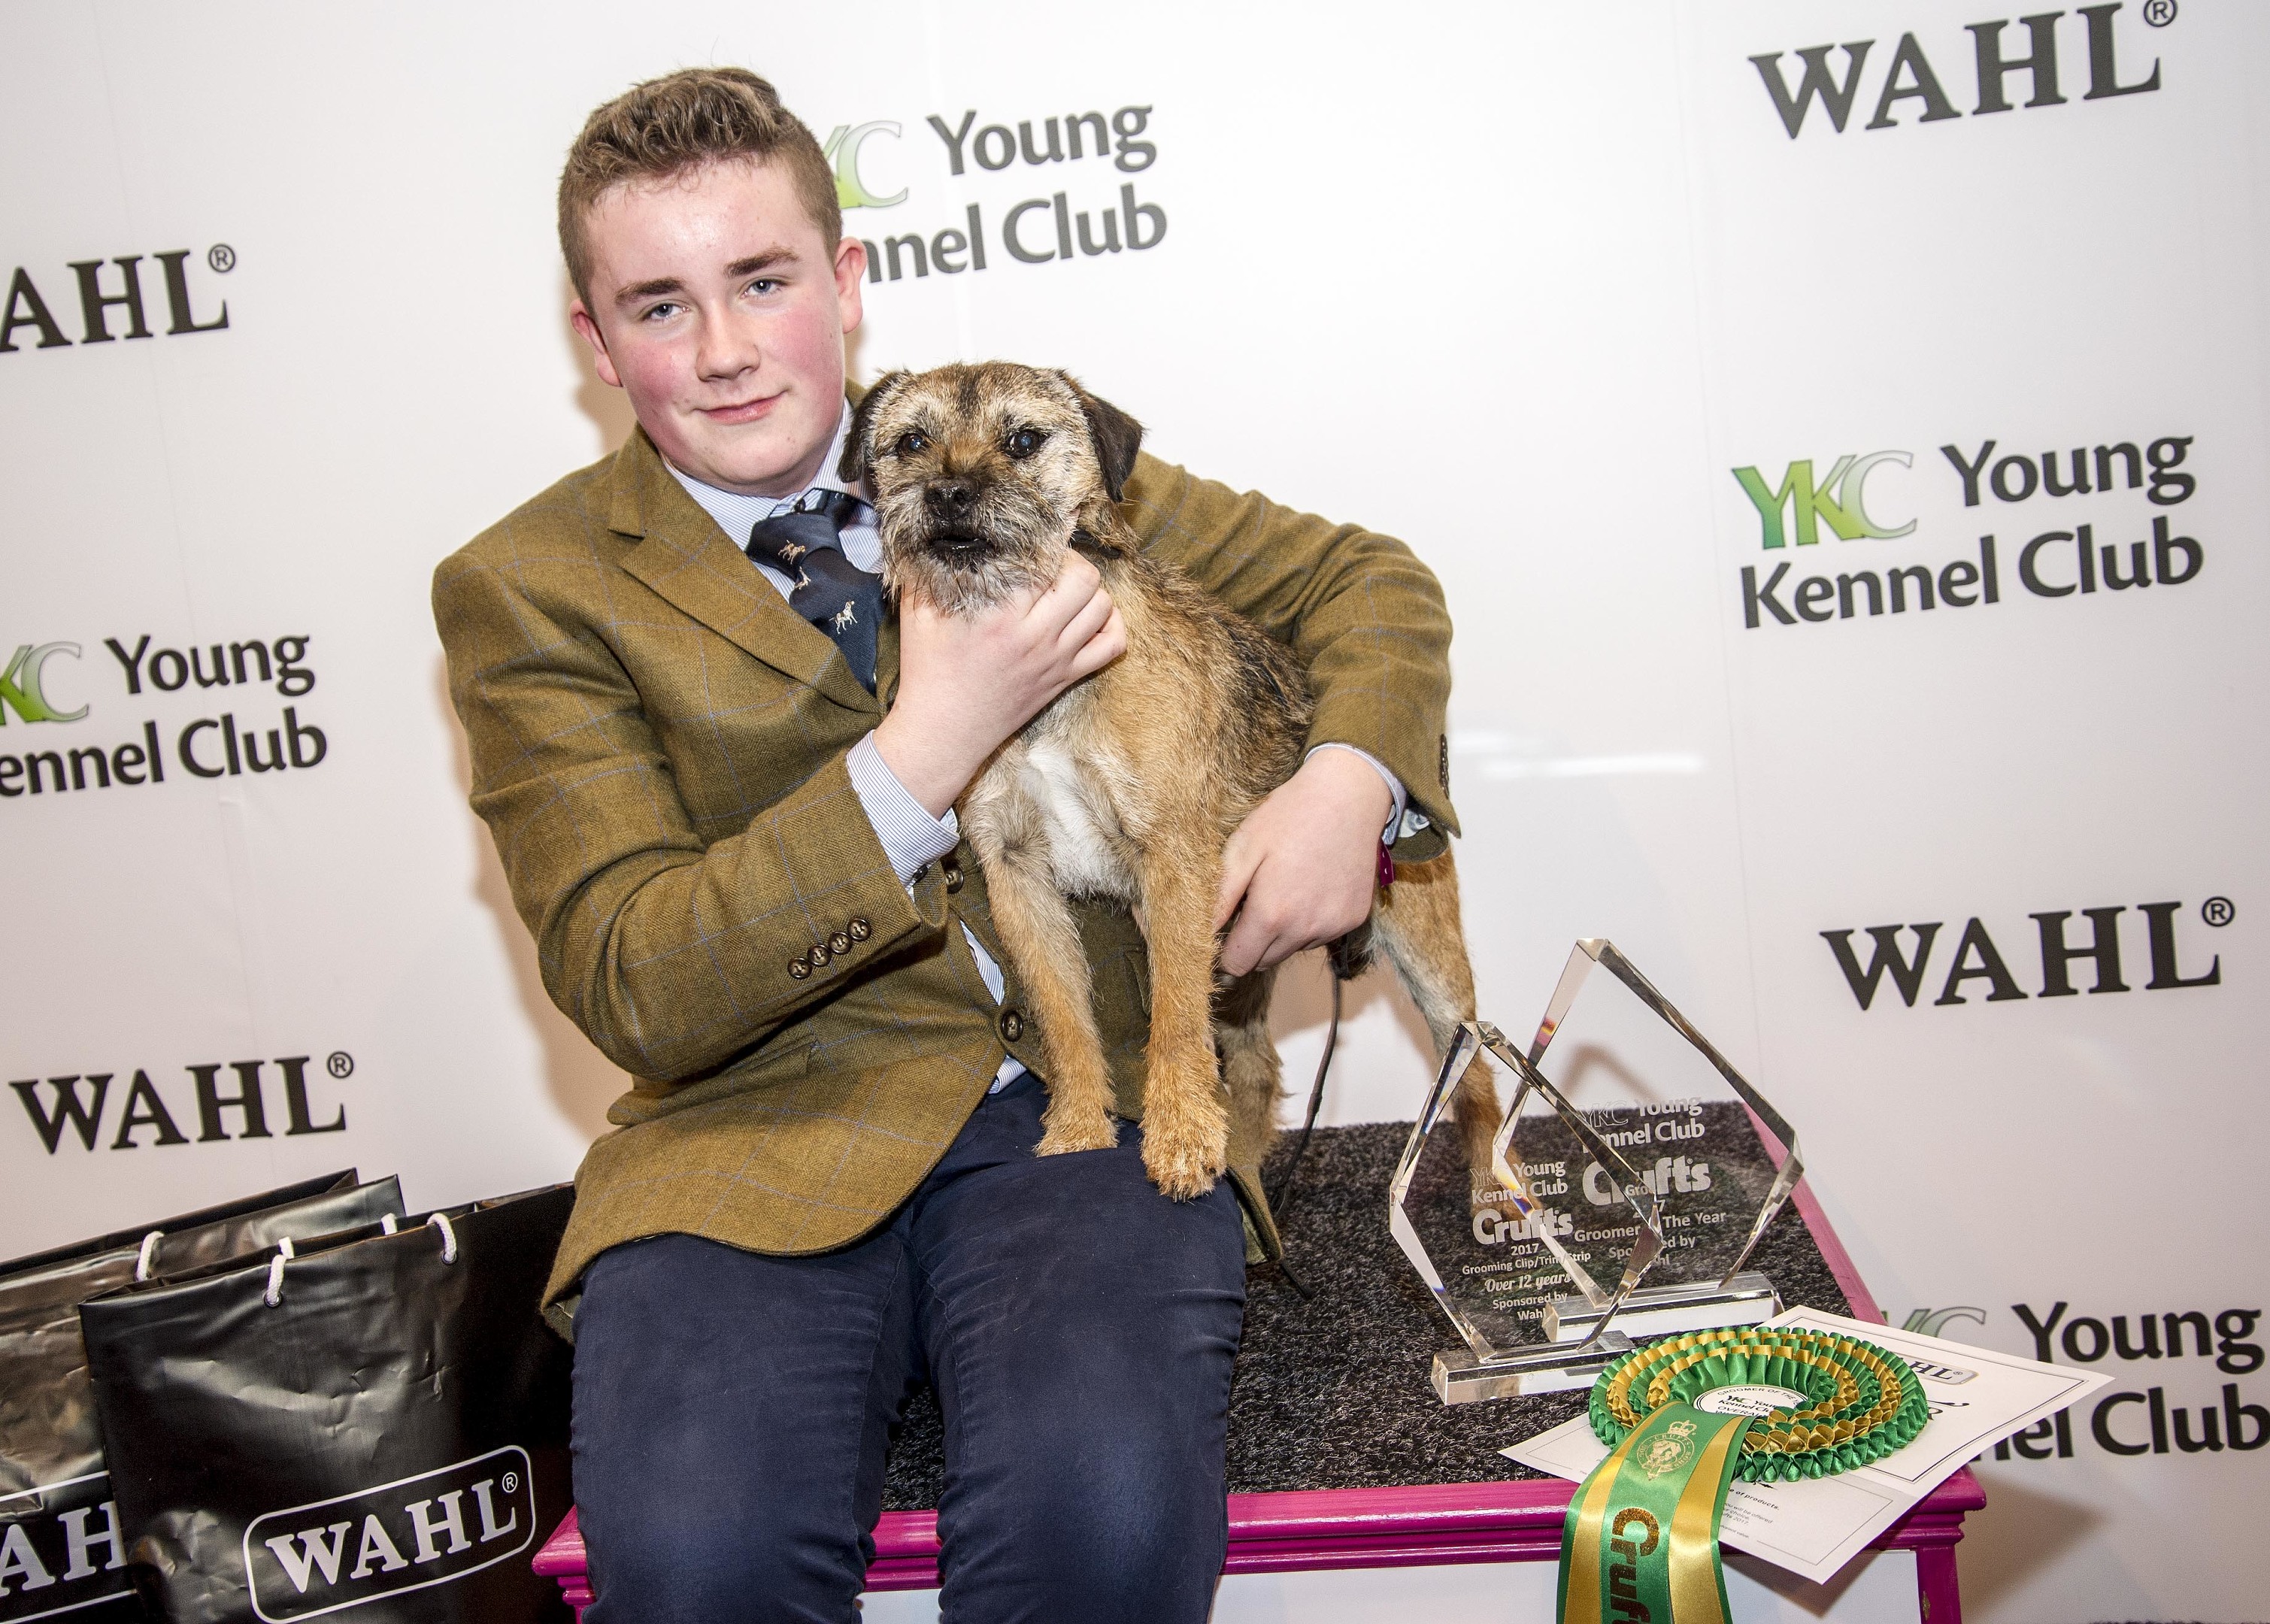 20170310 Copyright onEdition 2017
Free for editorial use image, please credit: onEdition


YKC Groomer of the Year competition Overall Winner Hunter MacDonald (15) and Jock the Broder Terrier today (Friday 10.03.17), the second day of Crufts 2017, at the NEC Birmingham.


Crufts is the world's greatest dog show and this year will see around 22,000 healthy, happy dogs competing for the coveted 'Best in Show' title as well as taking part in the many other competitions that take place at the show, from Agility and Flyball to the hero dog competition Eukanuba Friends for Life and Scruffts Family Crossbreed of the Year. Crufts 2017 runs from the 9th to the 12th March at the NEC, Birmingham.

Crufts is the perfect opportunity for dog lovers meet around 200 breeds of dog, find out how to go about getting a dog, and to find out about activities and competitions they can get involved in with their own dog.

For more information please contact the Press Office via: T: 020 7518 1008 / 1020
E: press.office@thekennelclub.org.uk

For additional images please visit: http://www.w-w-i.com/crufts_2017/

If you require a higher resolution image or you have any other onEdition photographic enquiries, please contact onEdition on 0845 900 2 900 or email info@onEdition.com

This image is copyright onEdition 2017.

This image has been supplied by onEdition and must be credited onEdition.
The author is asserting his full Moral rights in relation to the publication of this image. Rights for onward transmission of any image or file is not granted or implied. Changing or deleting Copyright information is illegal as specified in the Copyright, Design and Patents Act 1988. 

If you are in any way unsure of your right to publish this image please contact onEdition on 0845 900 2 900 or email info@onEdition.com